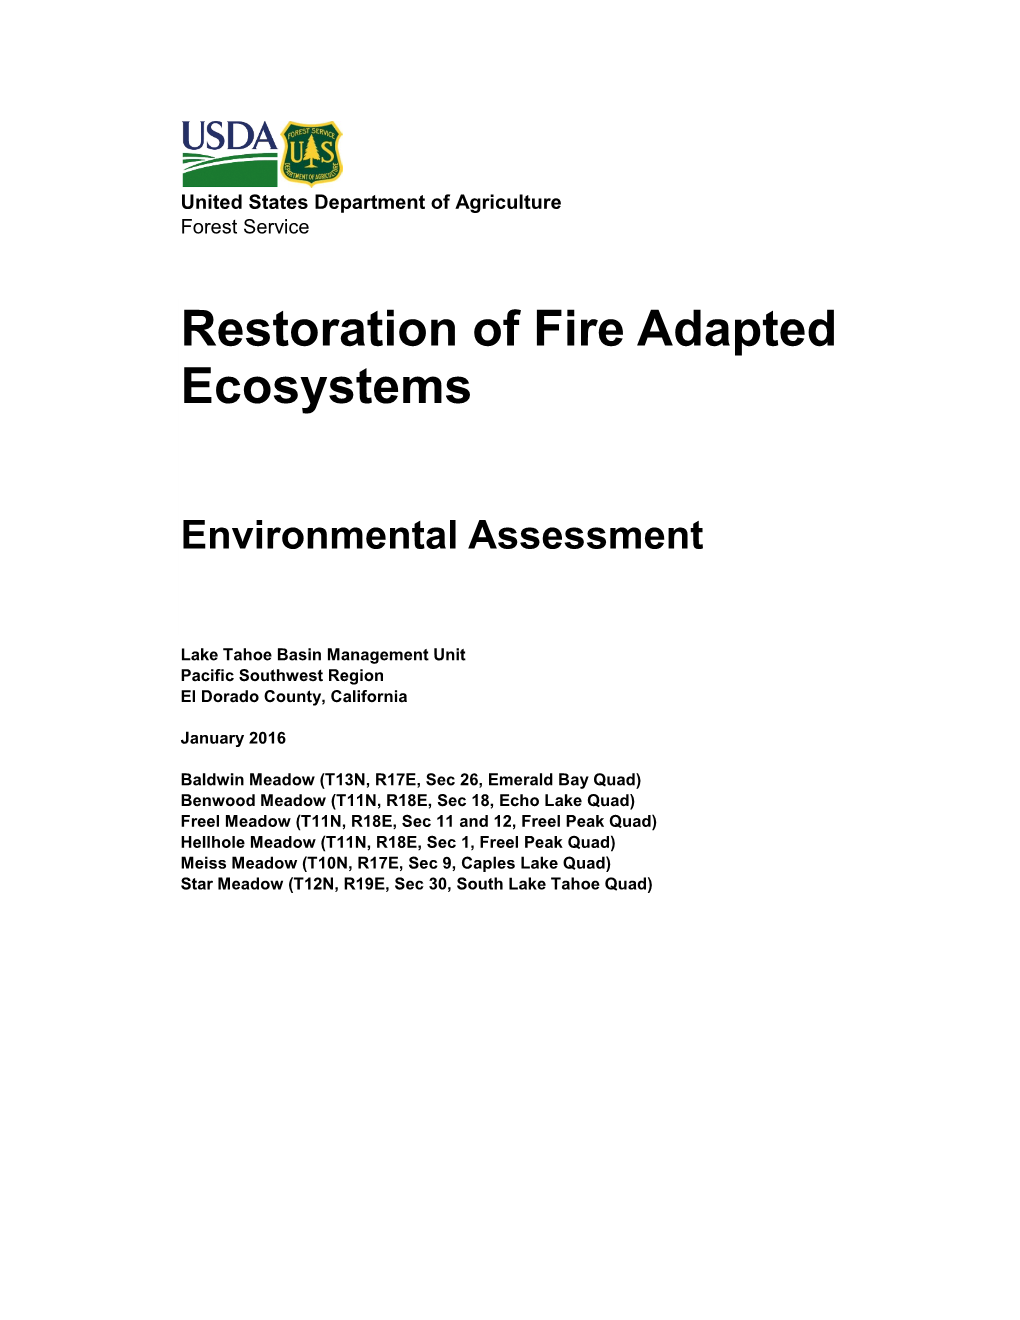 Restoration of Fire Adapted Ecosystems